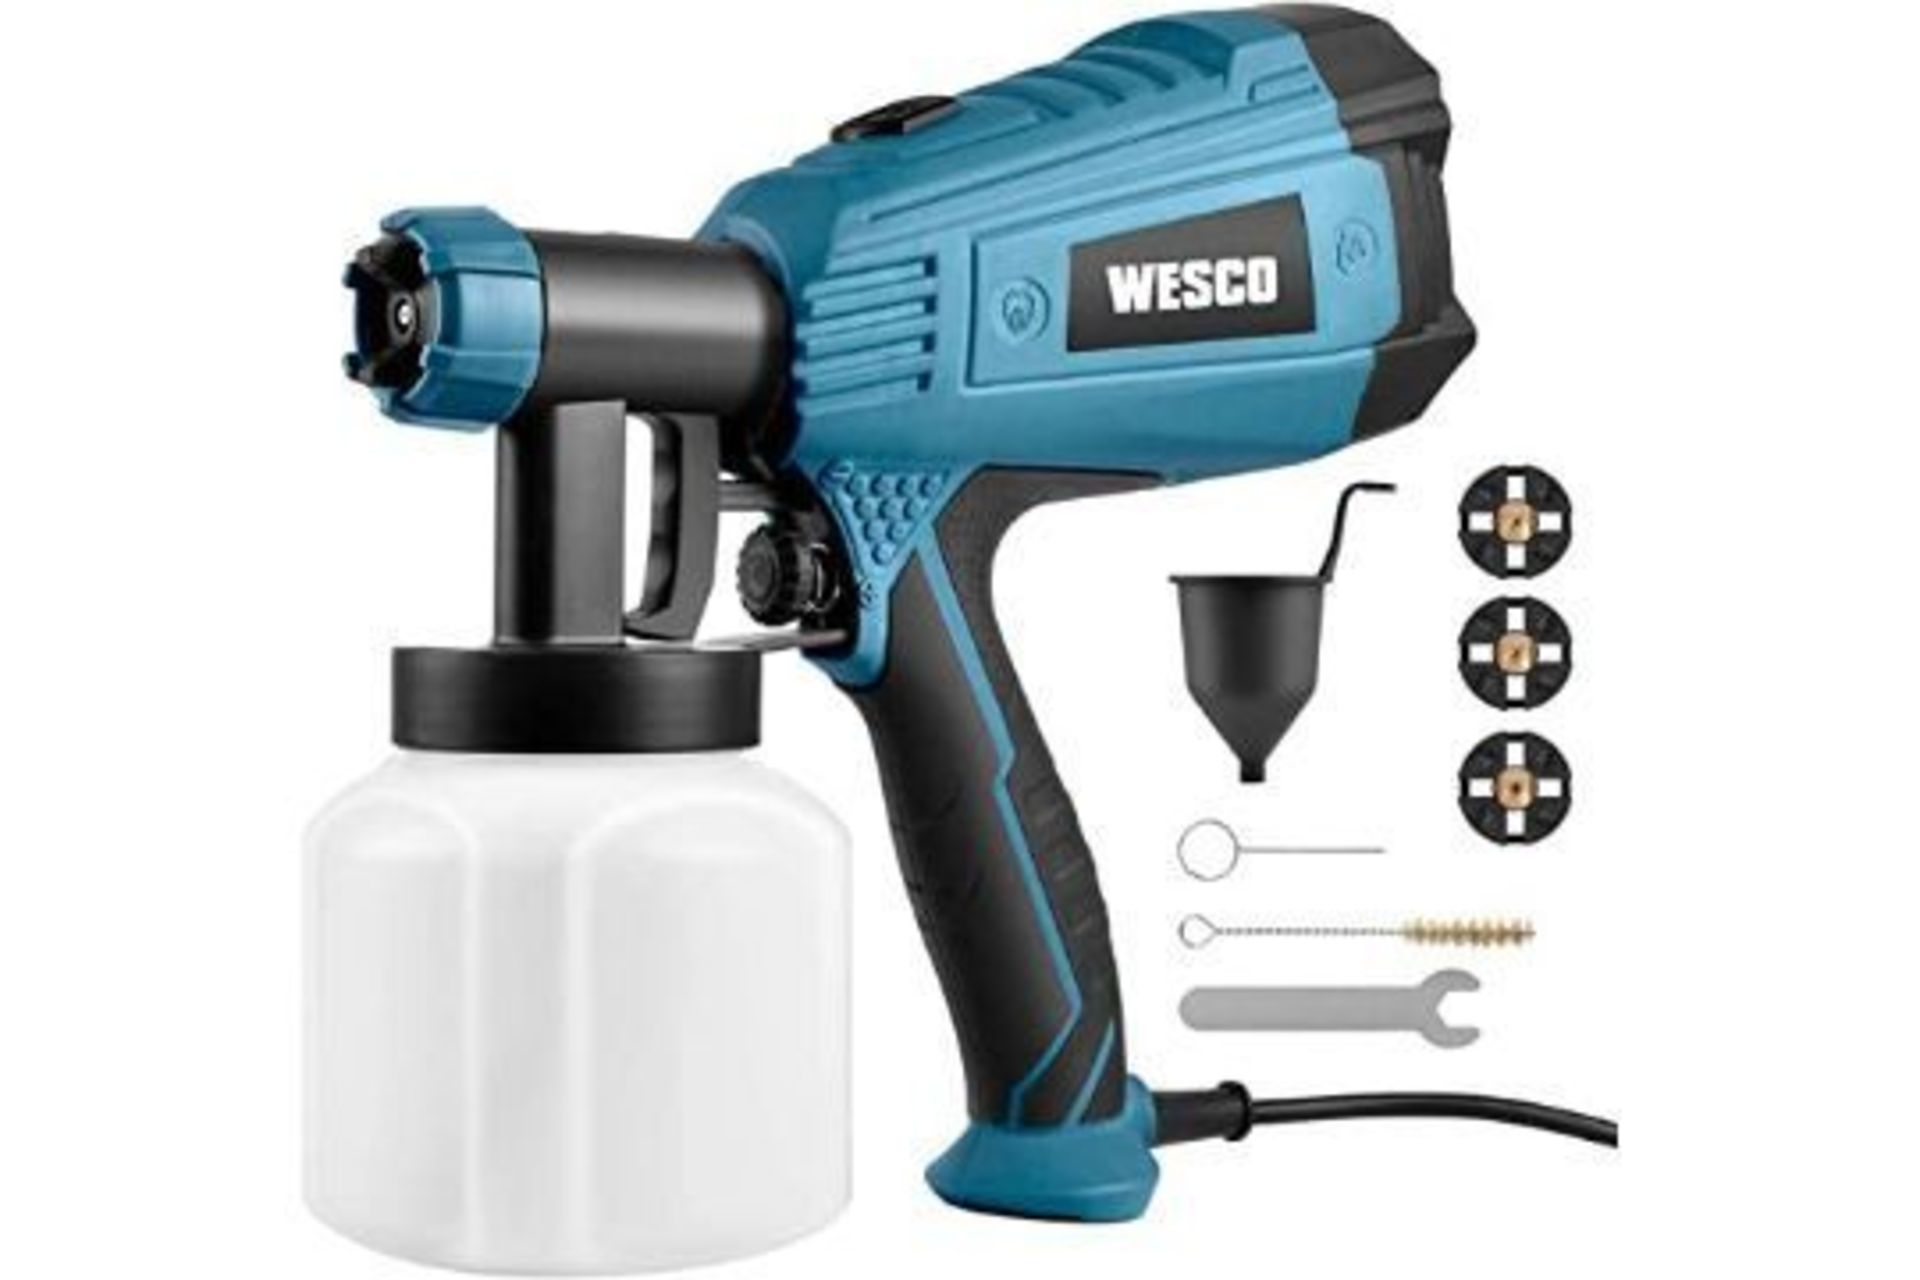 2 x NEW BOXED WESCO 500W Electric Paint Spray Gun with 3 Nozzles(1.5/1.8/2.0mm), 800ml/min Max Air